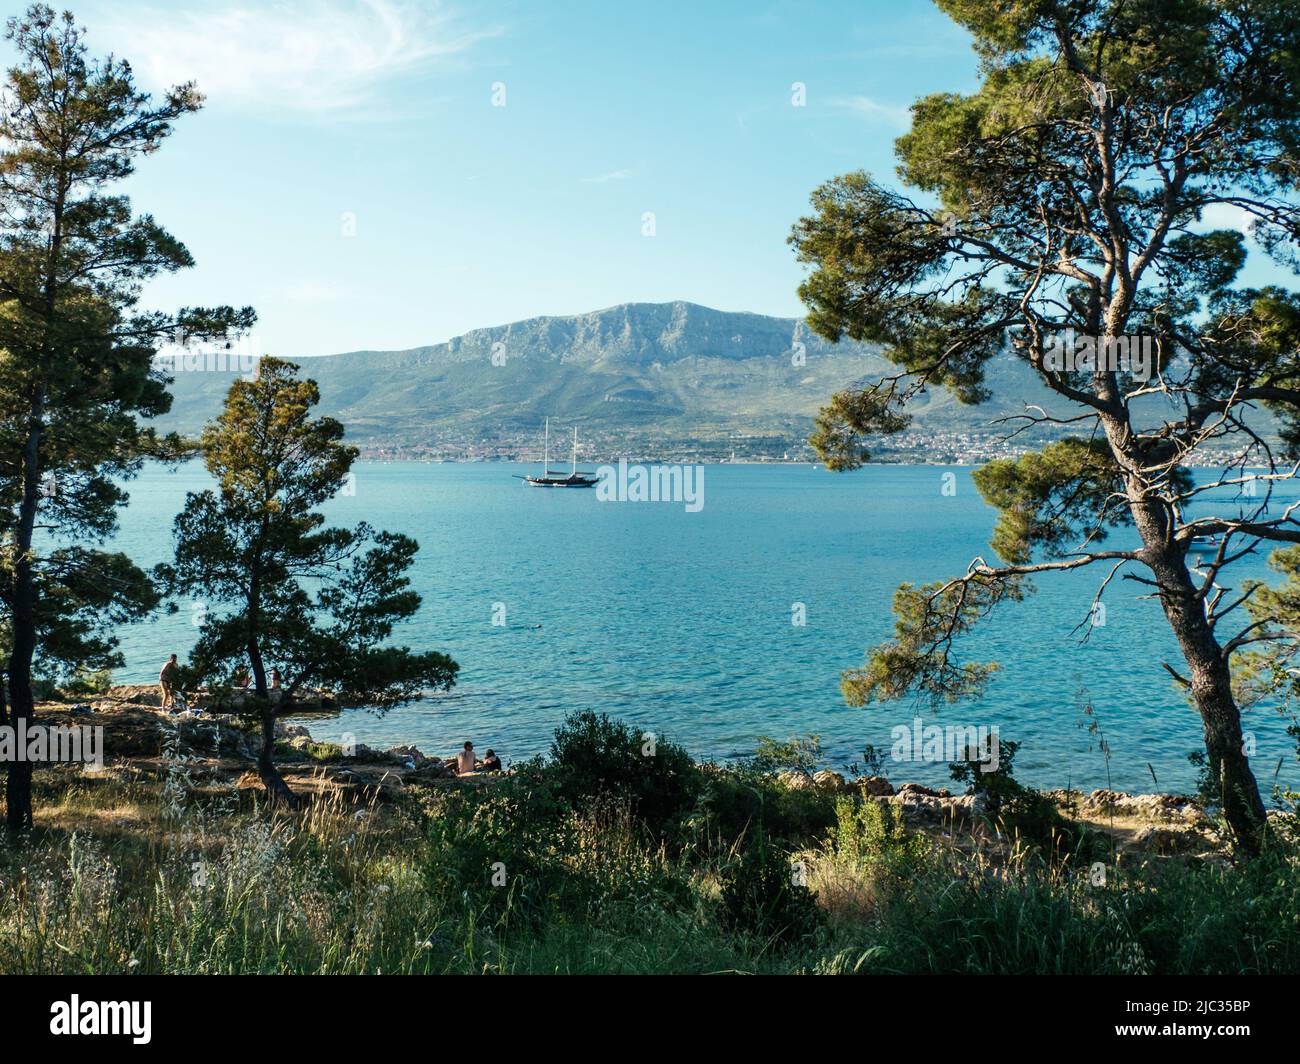 View of the Ocean at the Marjan Forest Park, a recreational area walkway in Split, Croatia Stock Photo